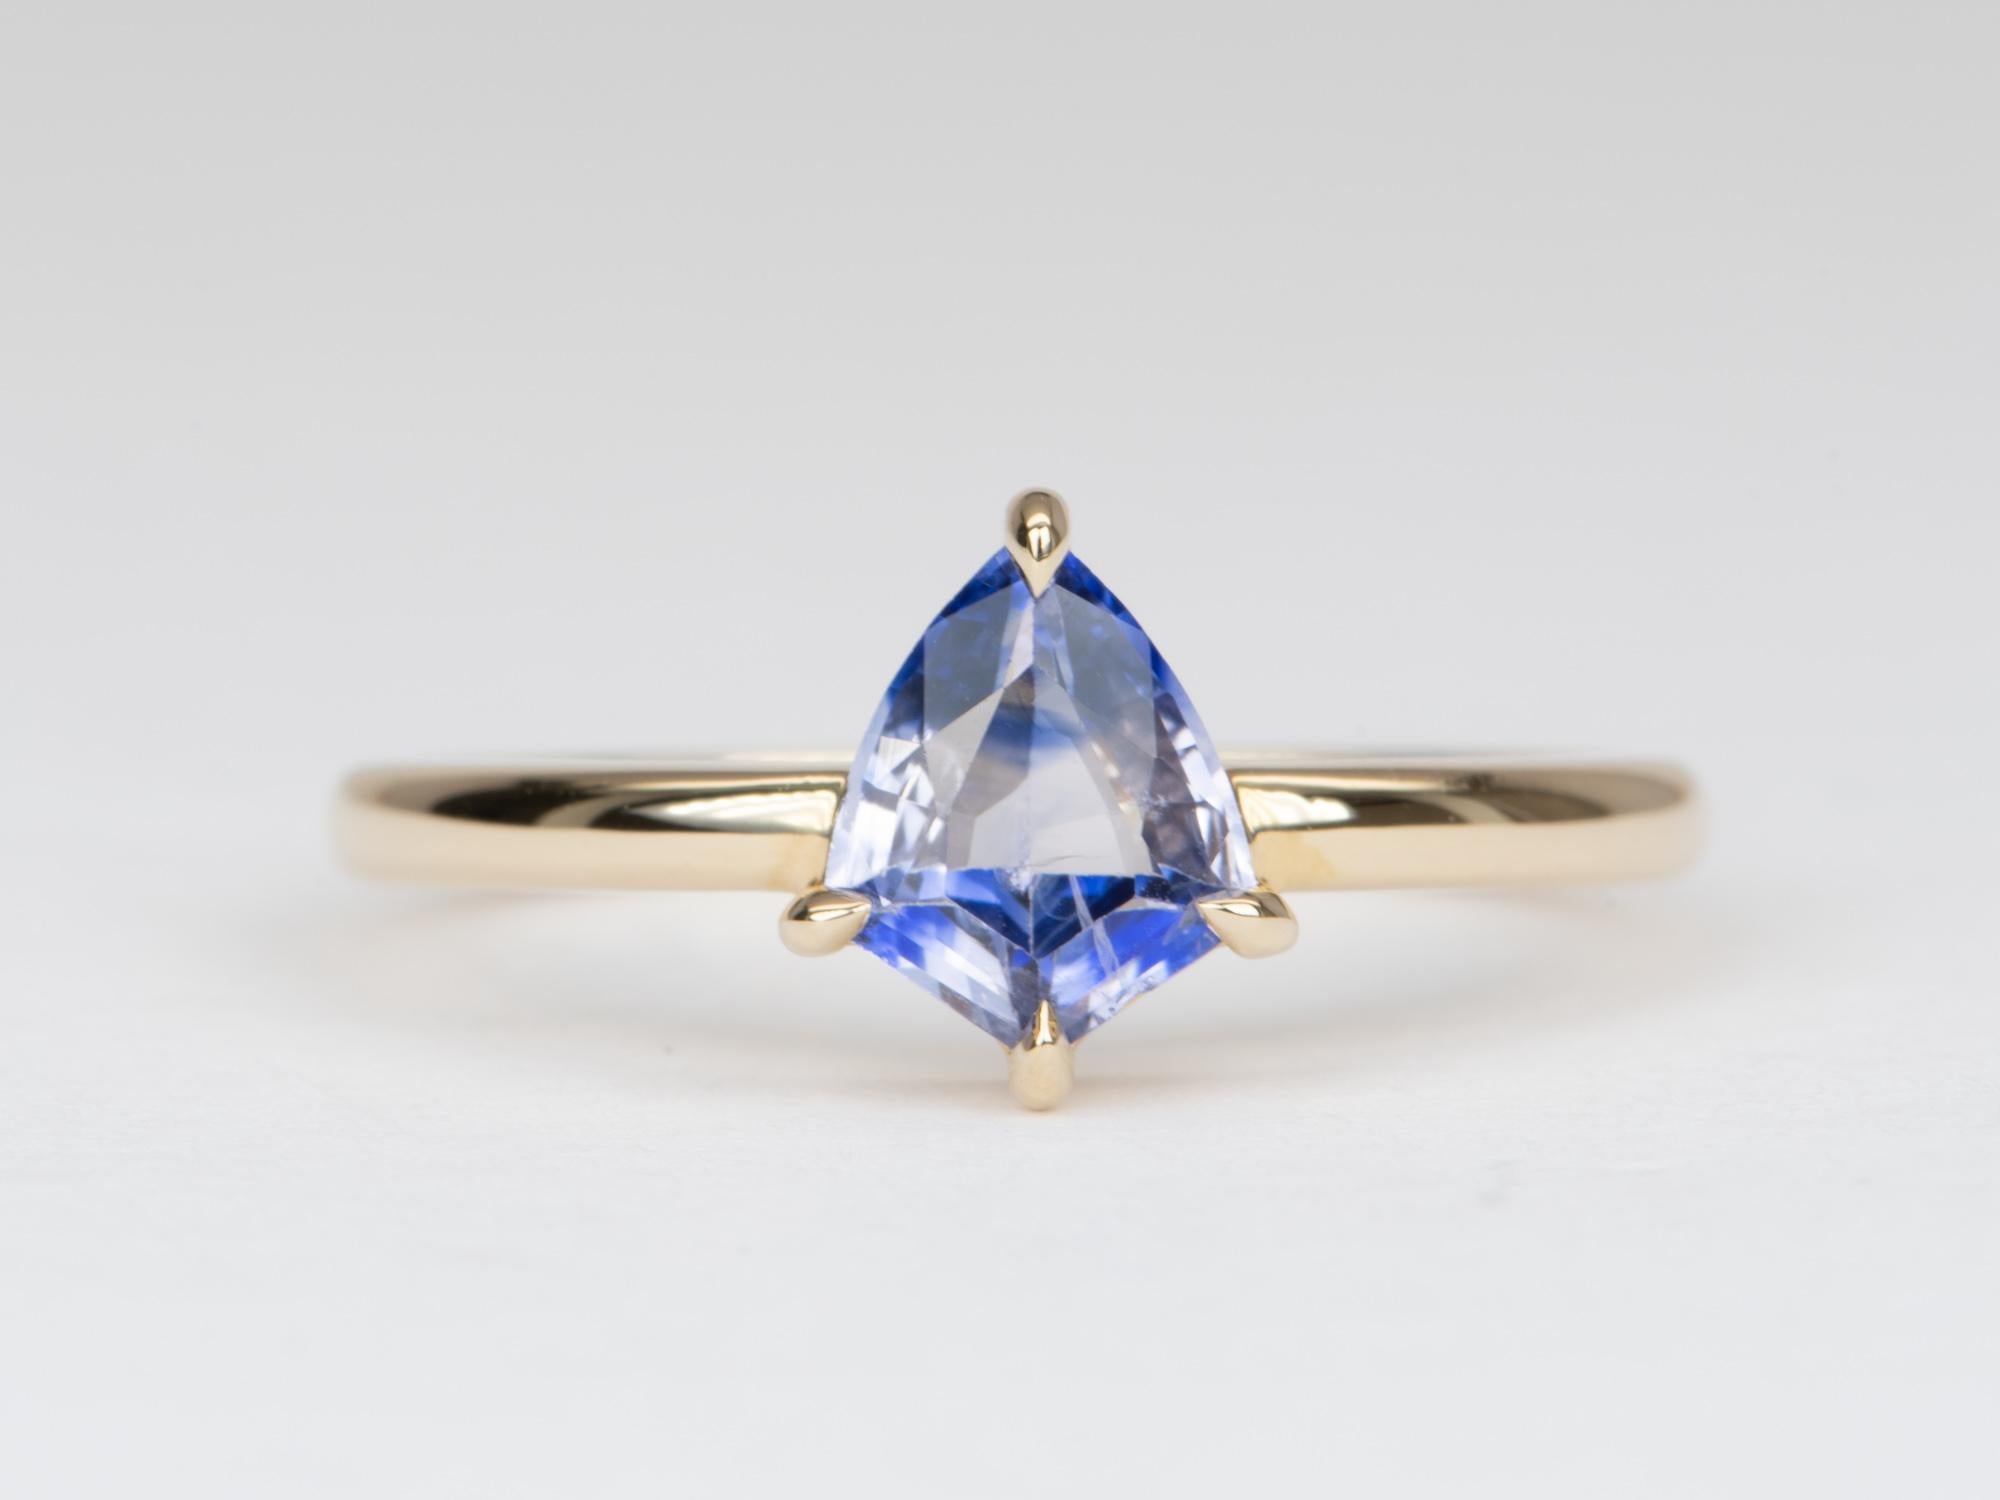 ♥ Solid 14K gold ring set with a shield-shaped bi-color sapphire
♥ It's a small but super unique sapphire, displaying great transparency and a blue purple color. One-of-a-kind stone and cannot be replicated!
♥ The overall setting measures 7.5mm in